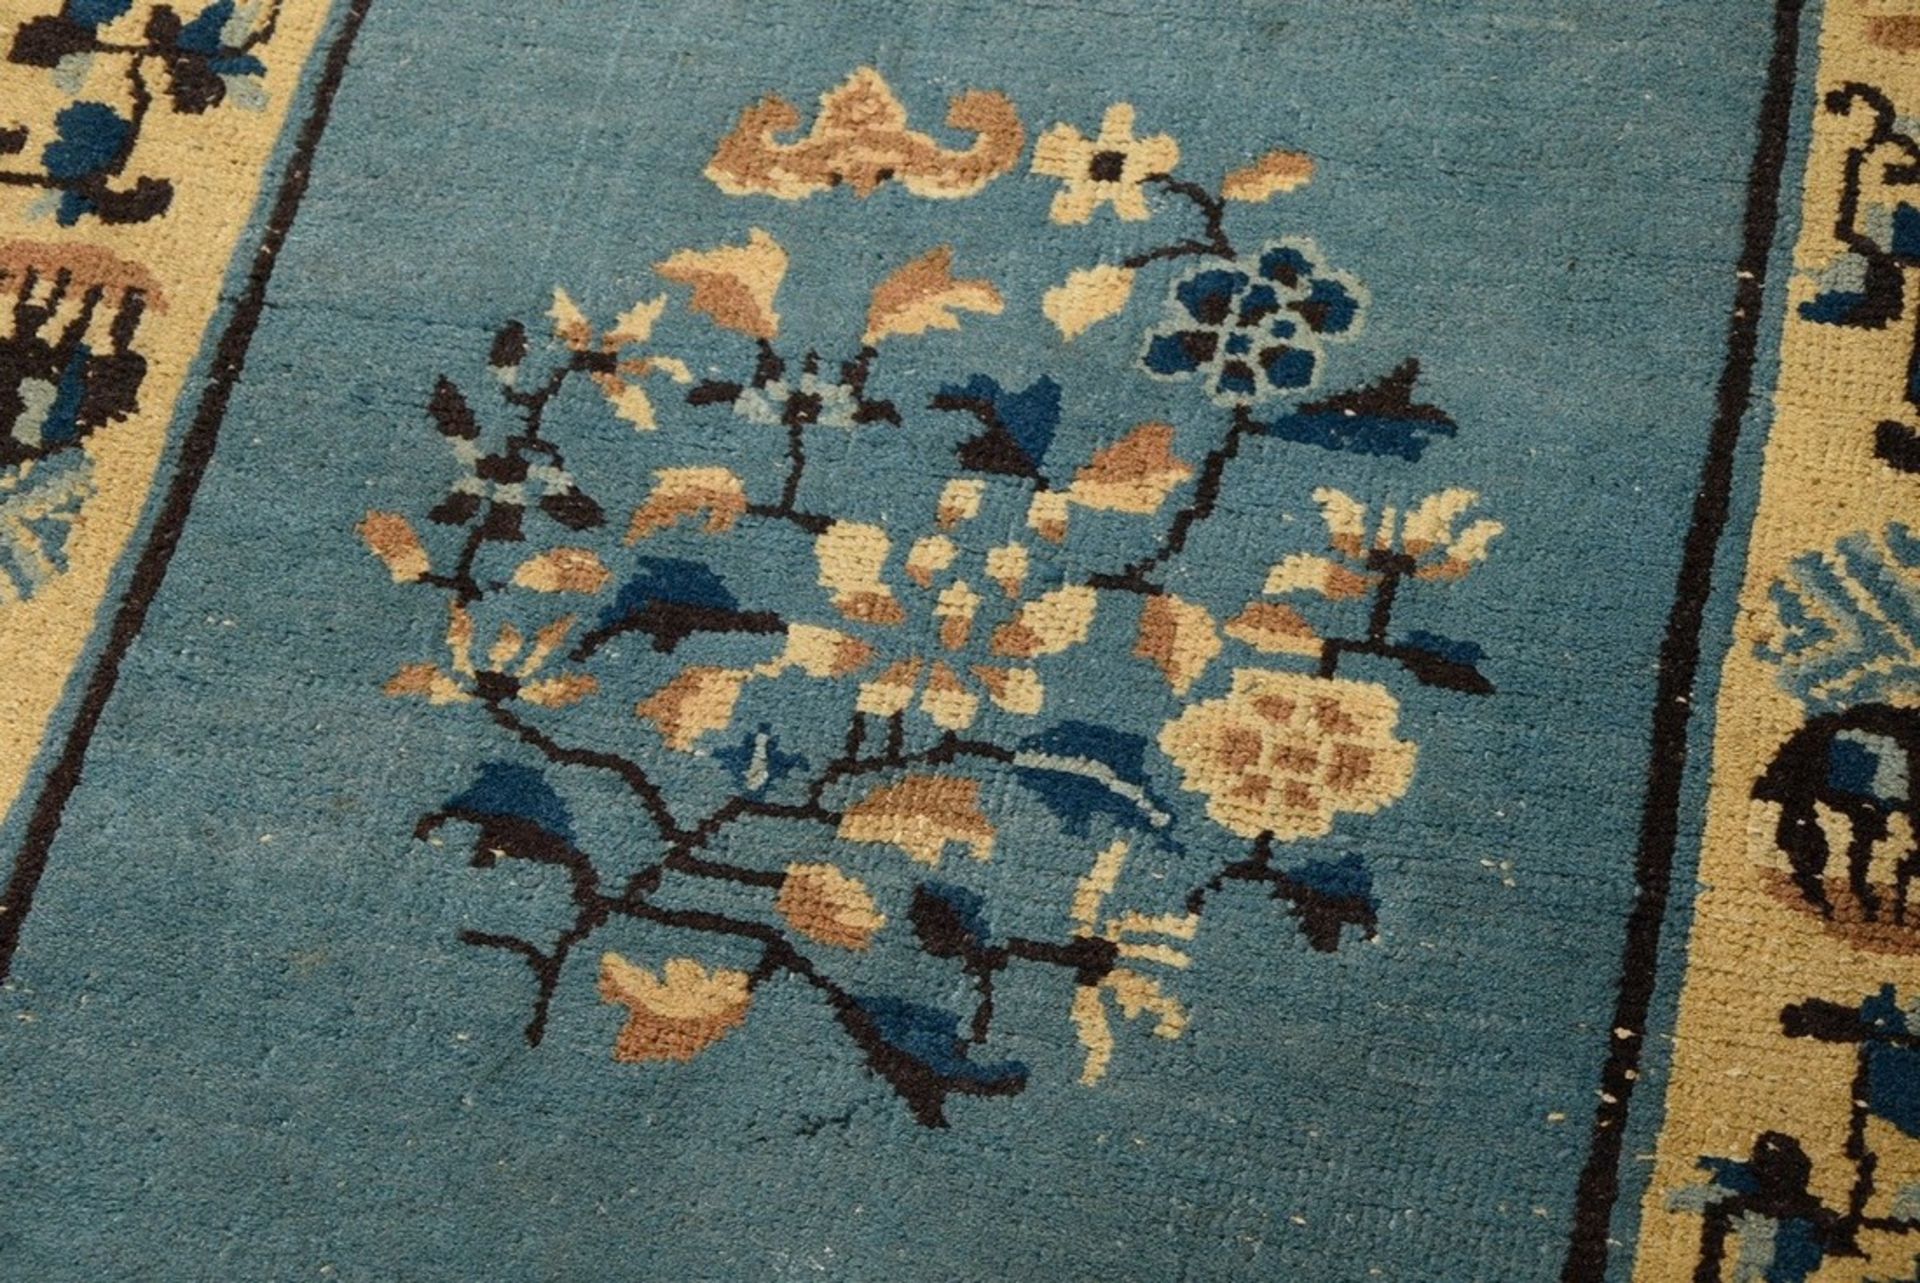 Chinese bridge "twigs and bat" on light blue field with light floral border and Shou characters in  - Image 3 of 8